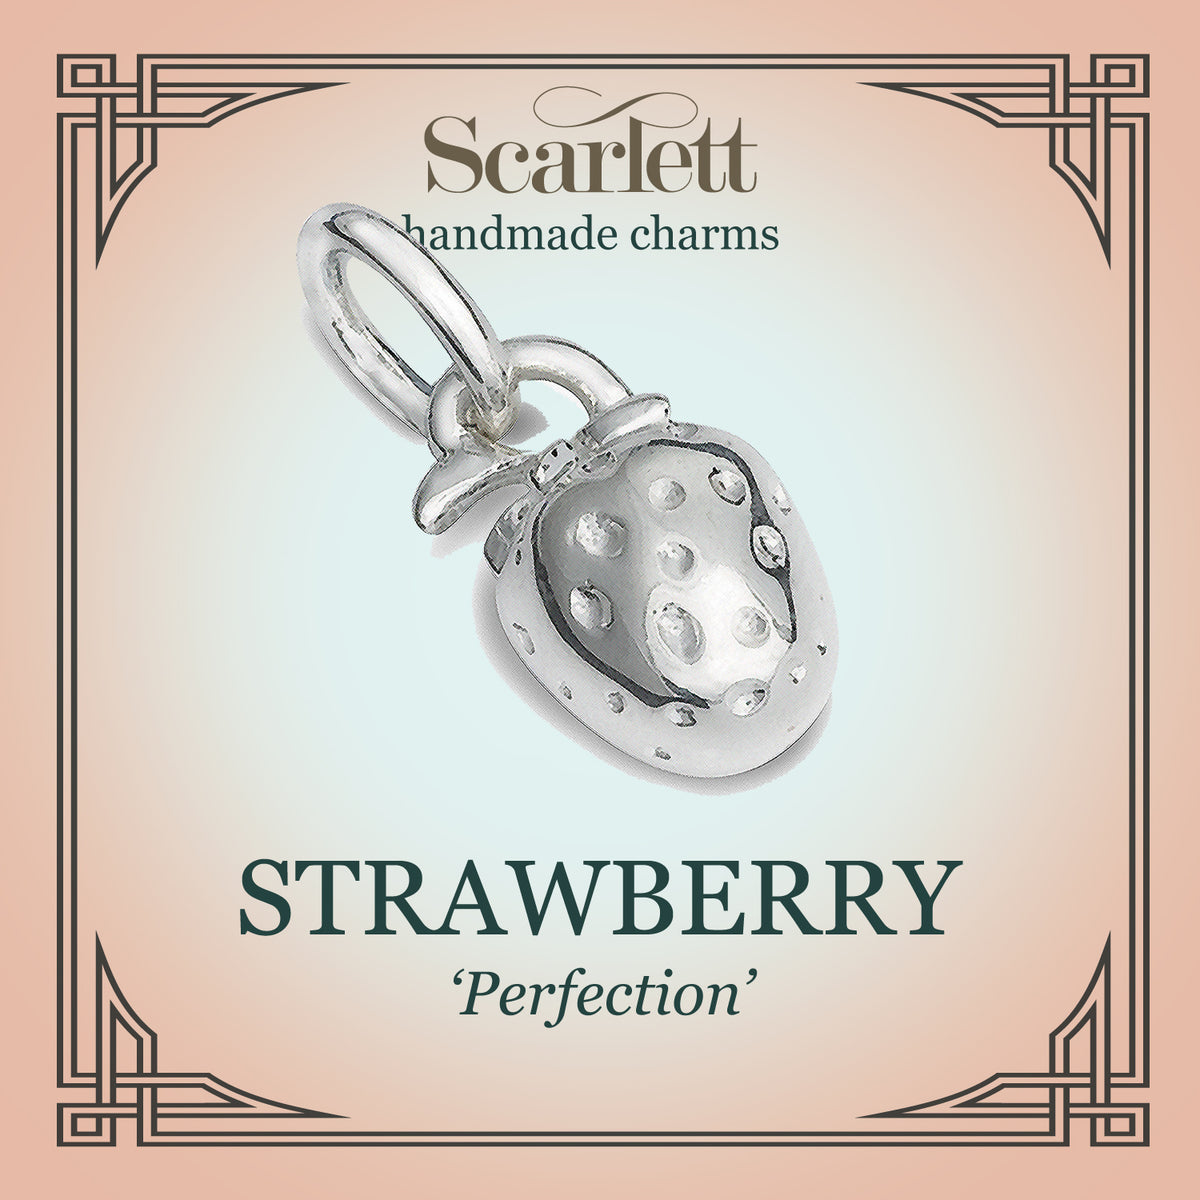 Strawberry silver wimbledon tennis charm for a silver bracelet links of london style